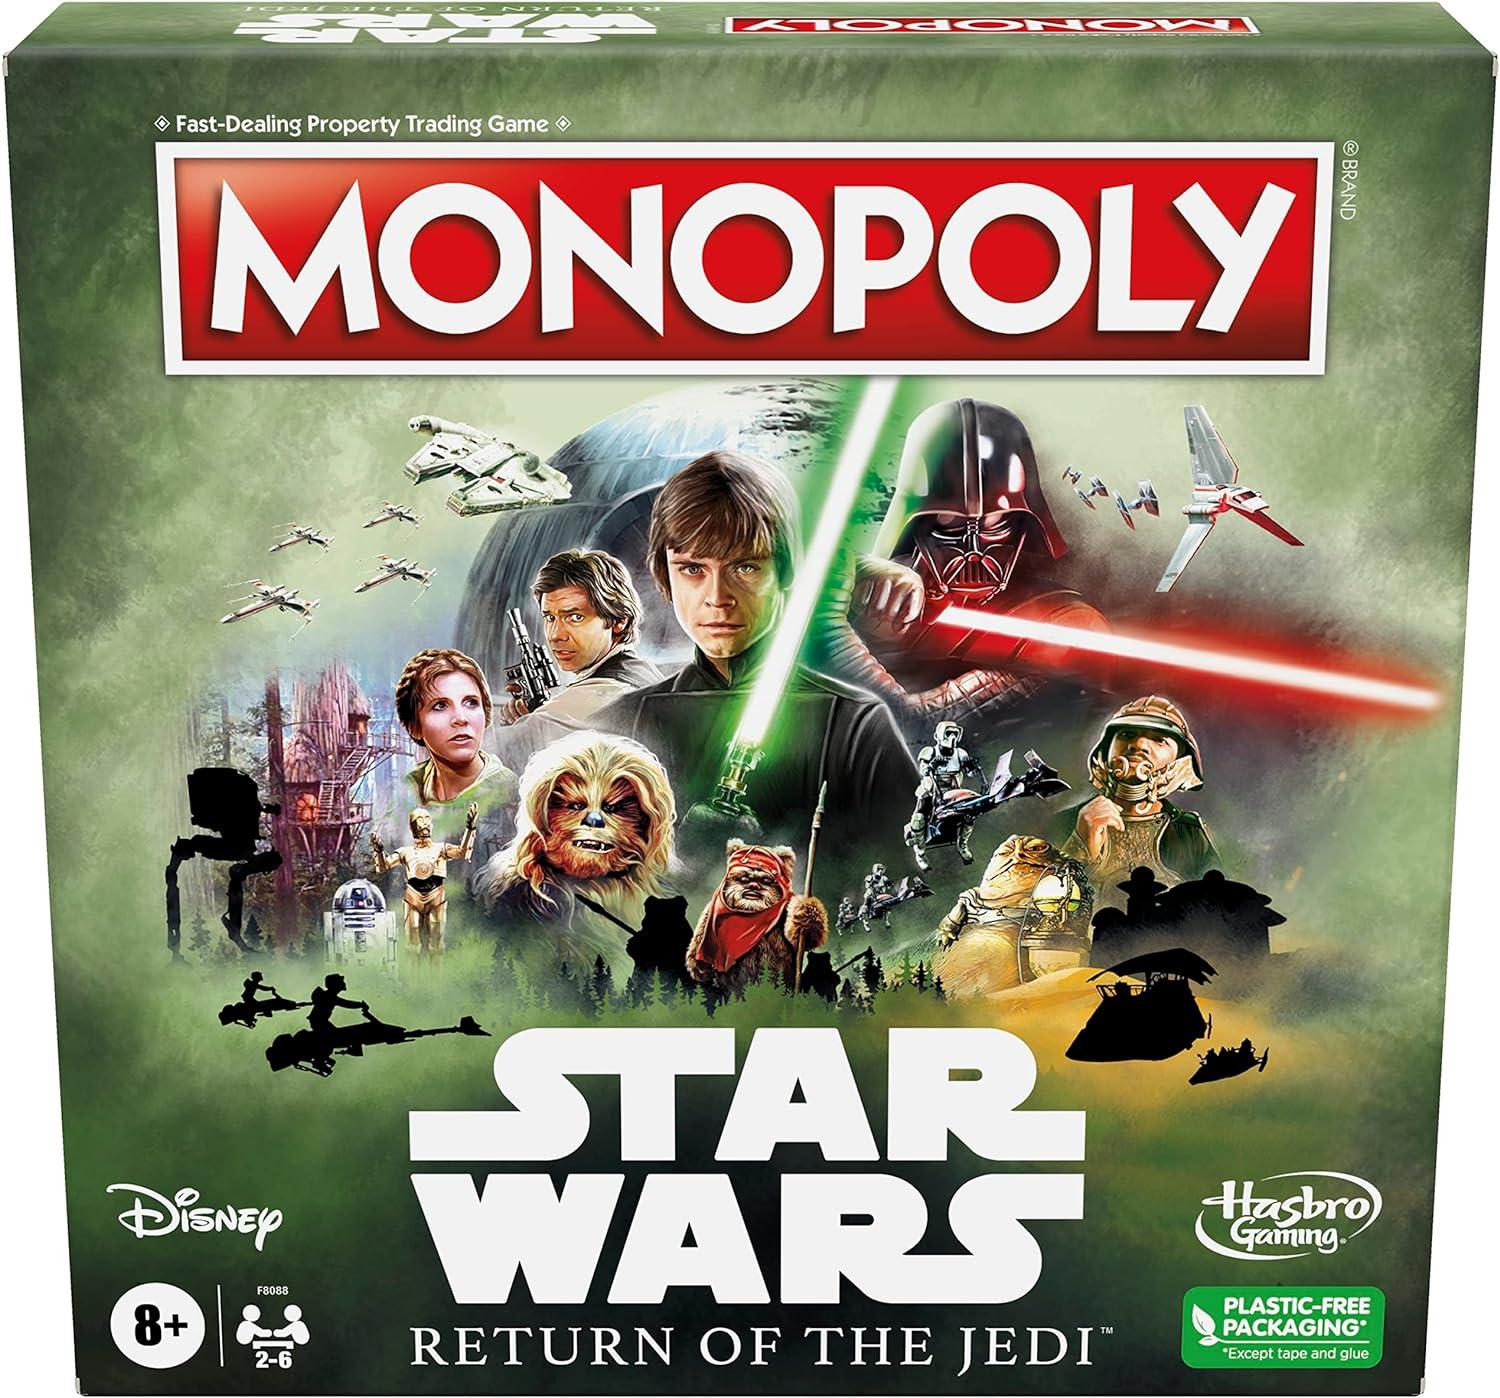 Monopoly Star Wars Return of The Jedi Board Game for $24.99